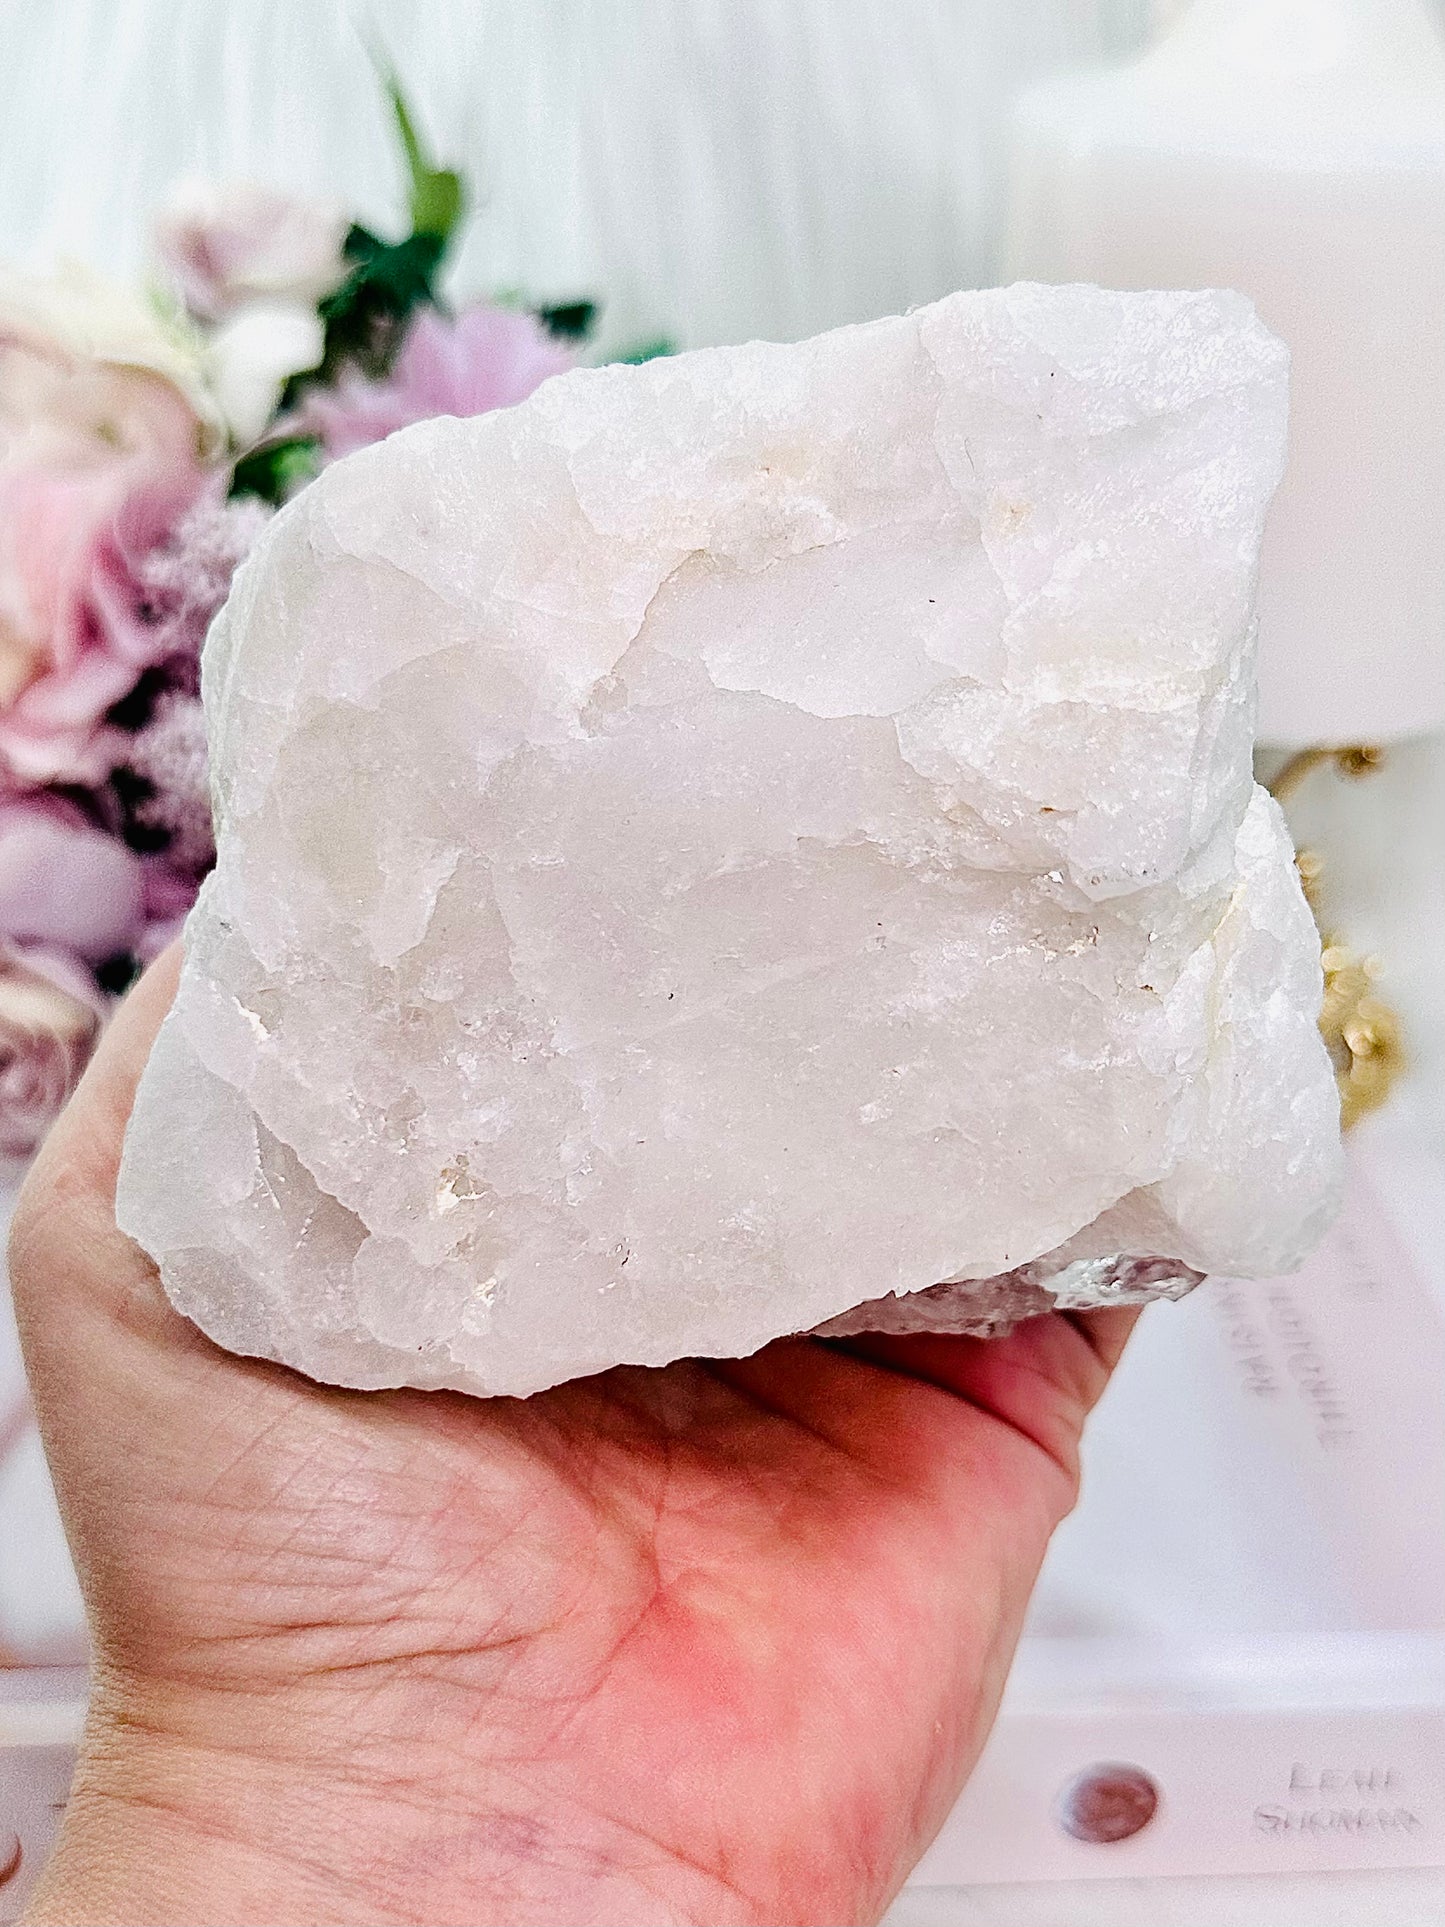 A Master Healer ~ Natural 479gram Clear Quartz Cluster From Brazil Absolutely Gorgeous